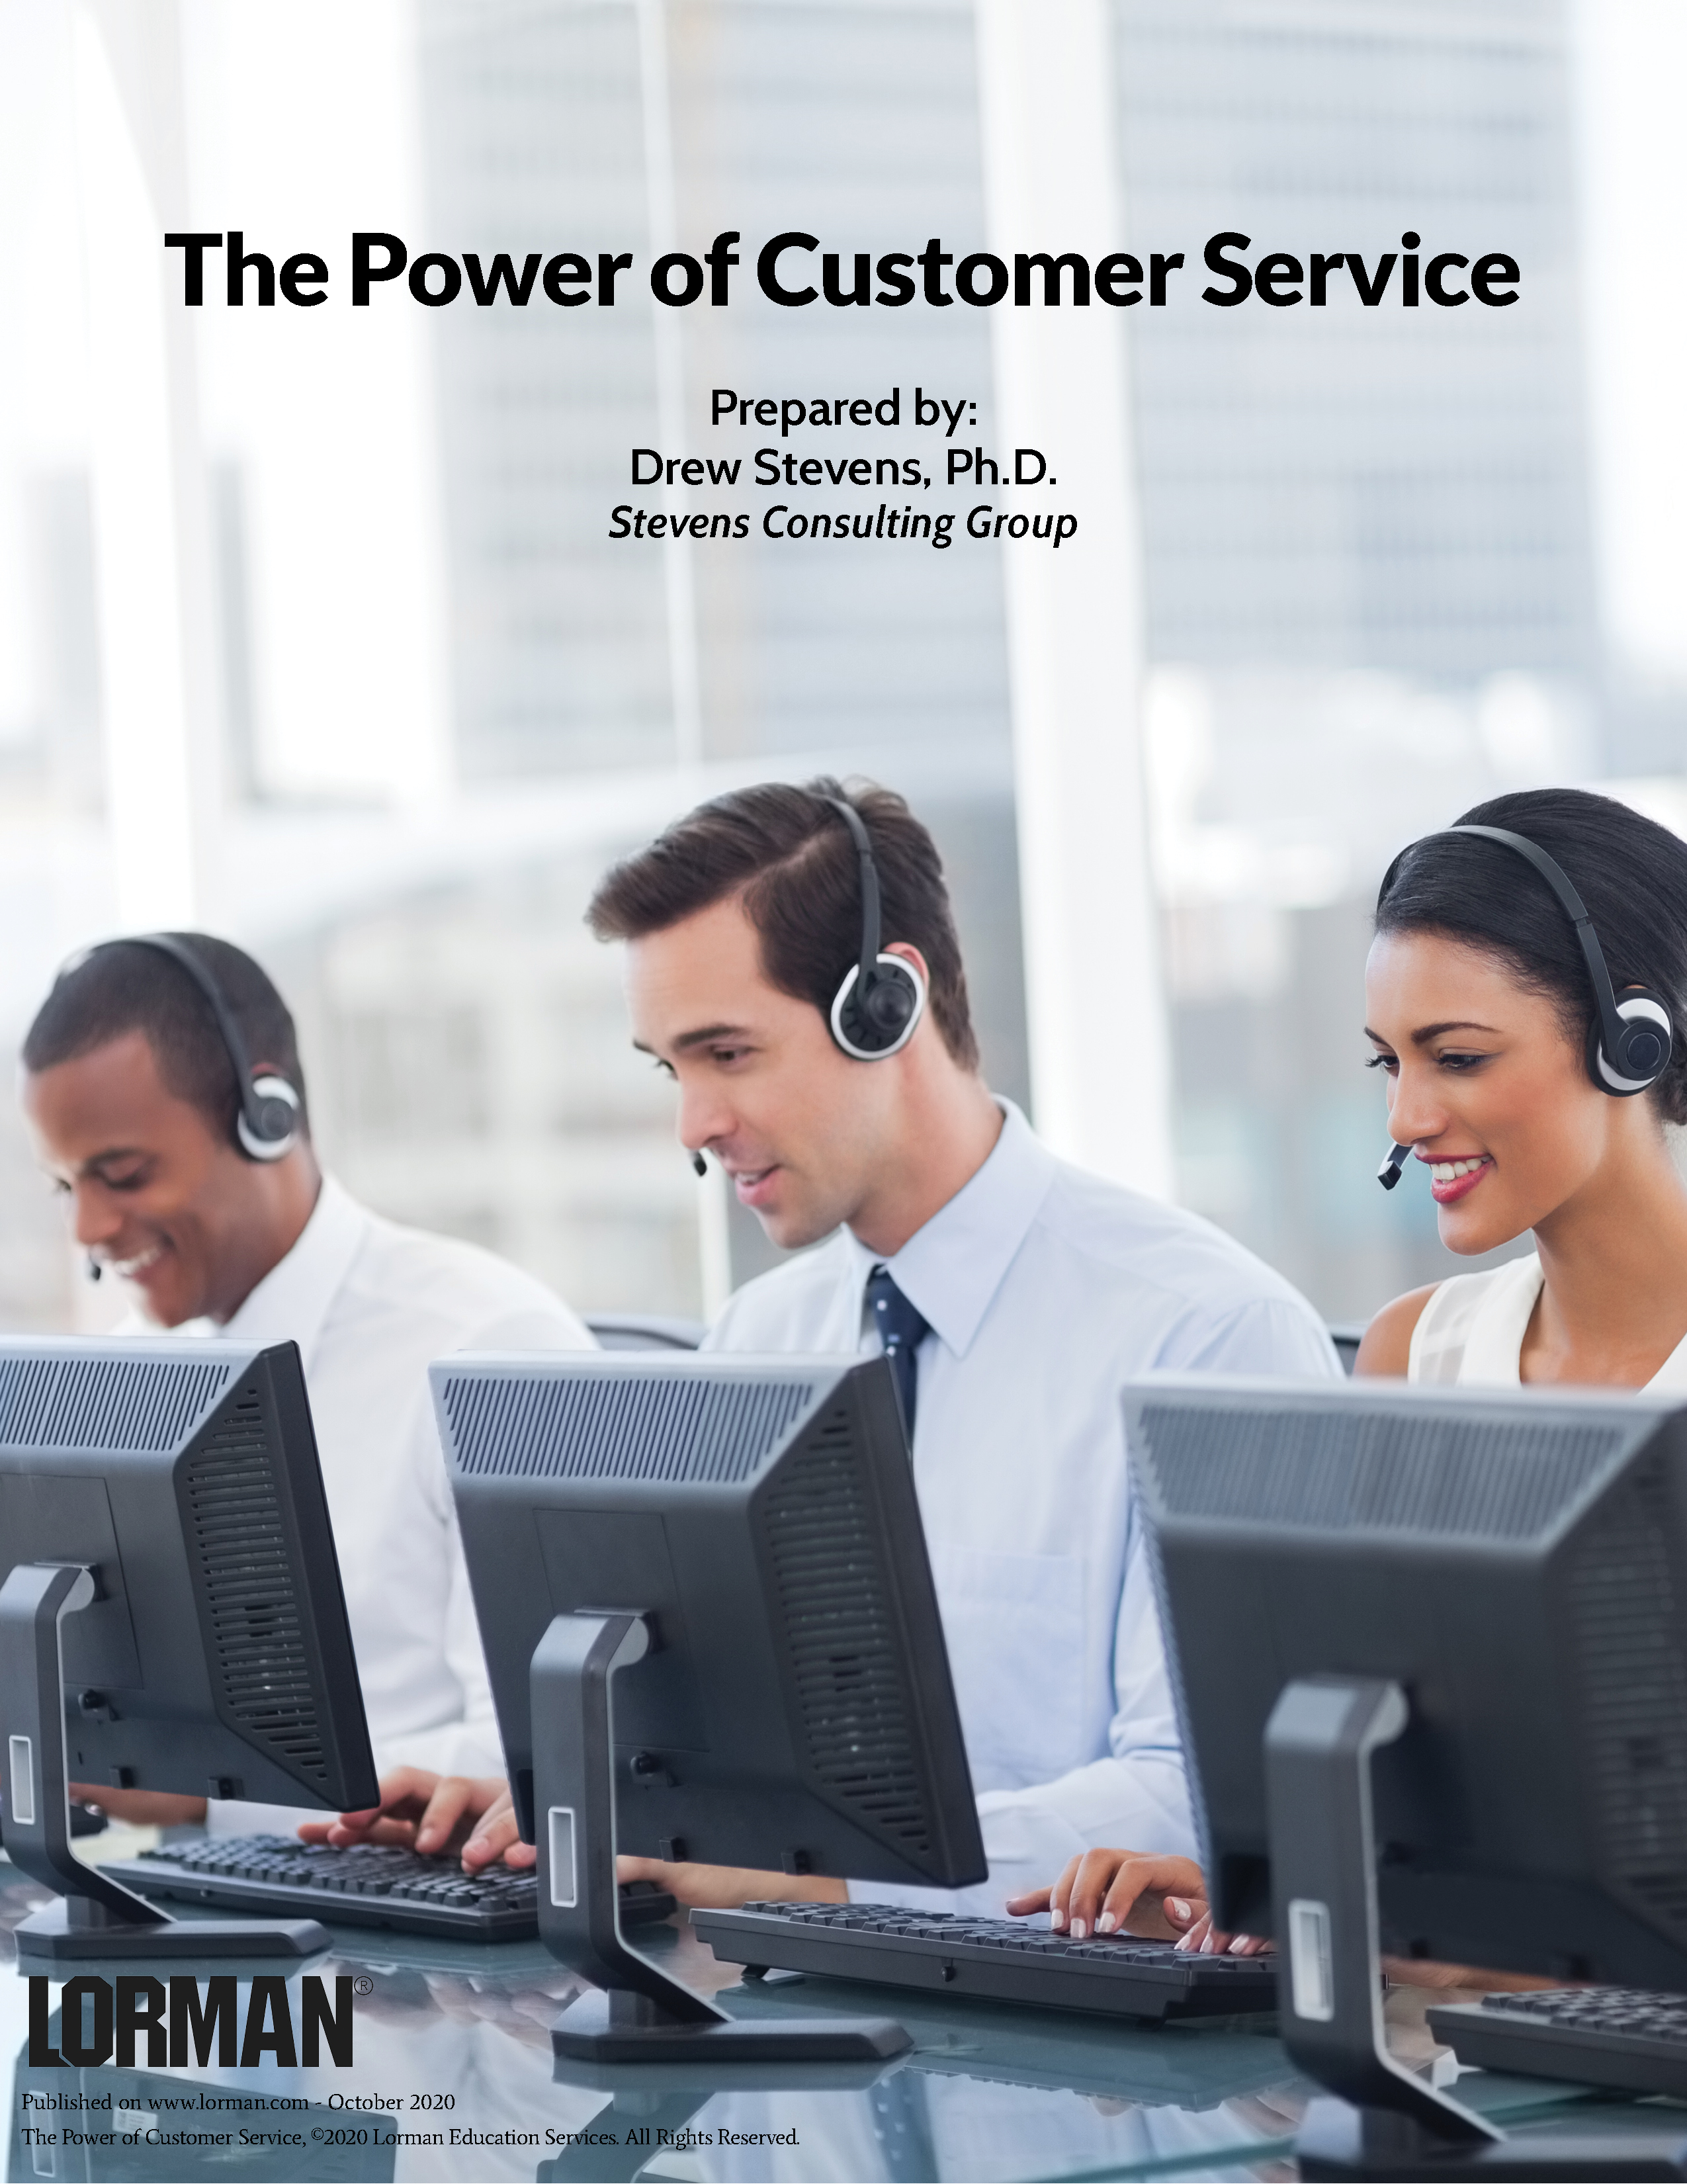 The Power of Customer Service